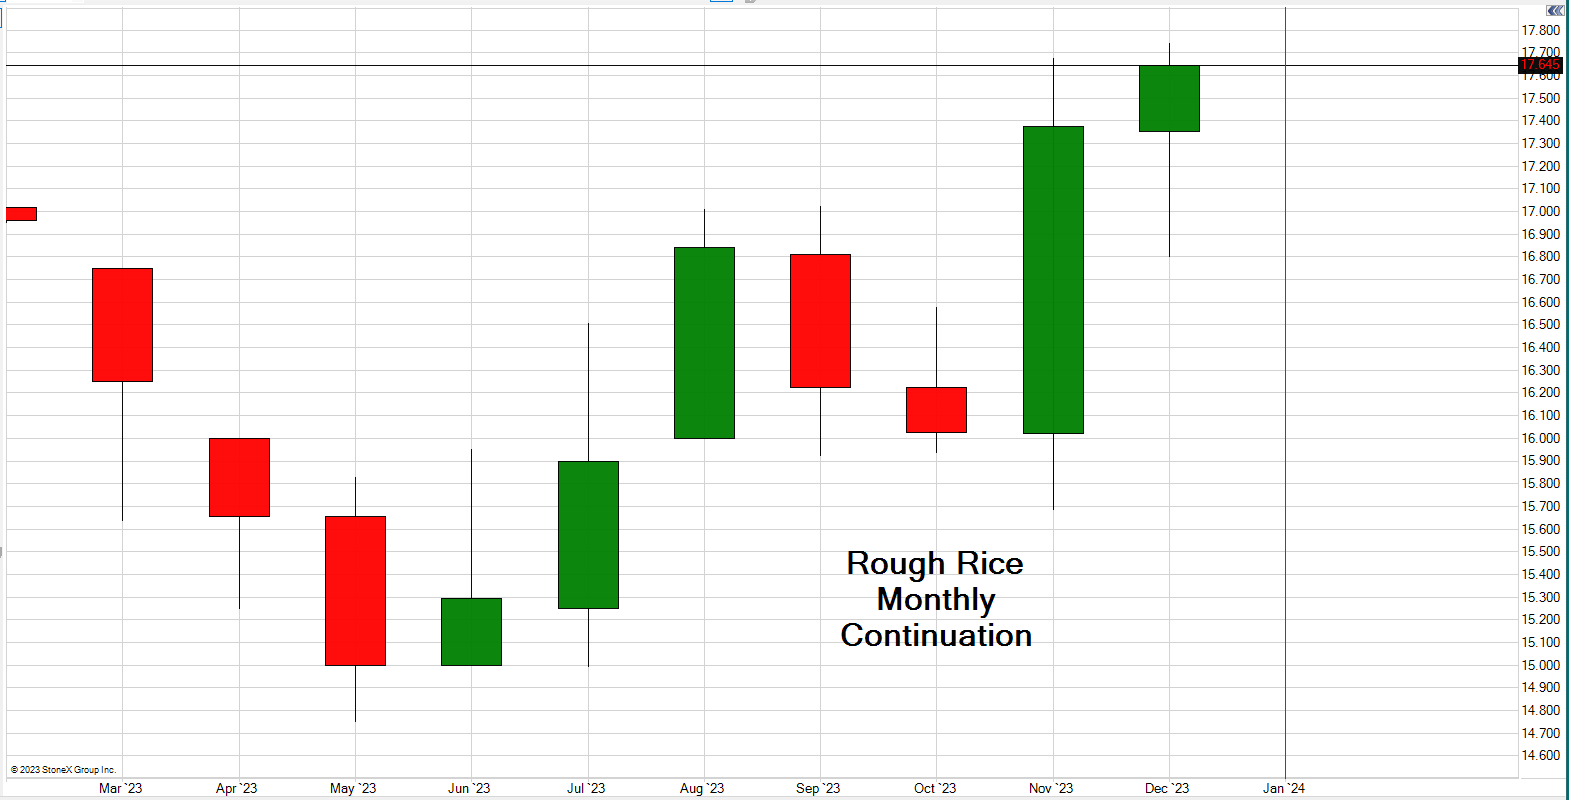 Rough Rice Futures Trading Chart updated March 3rd, 2022